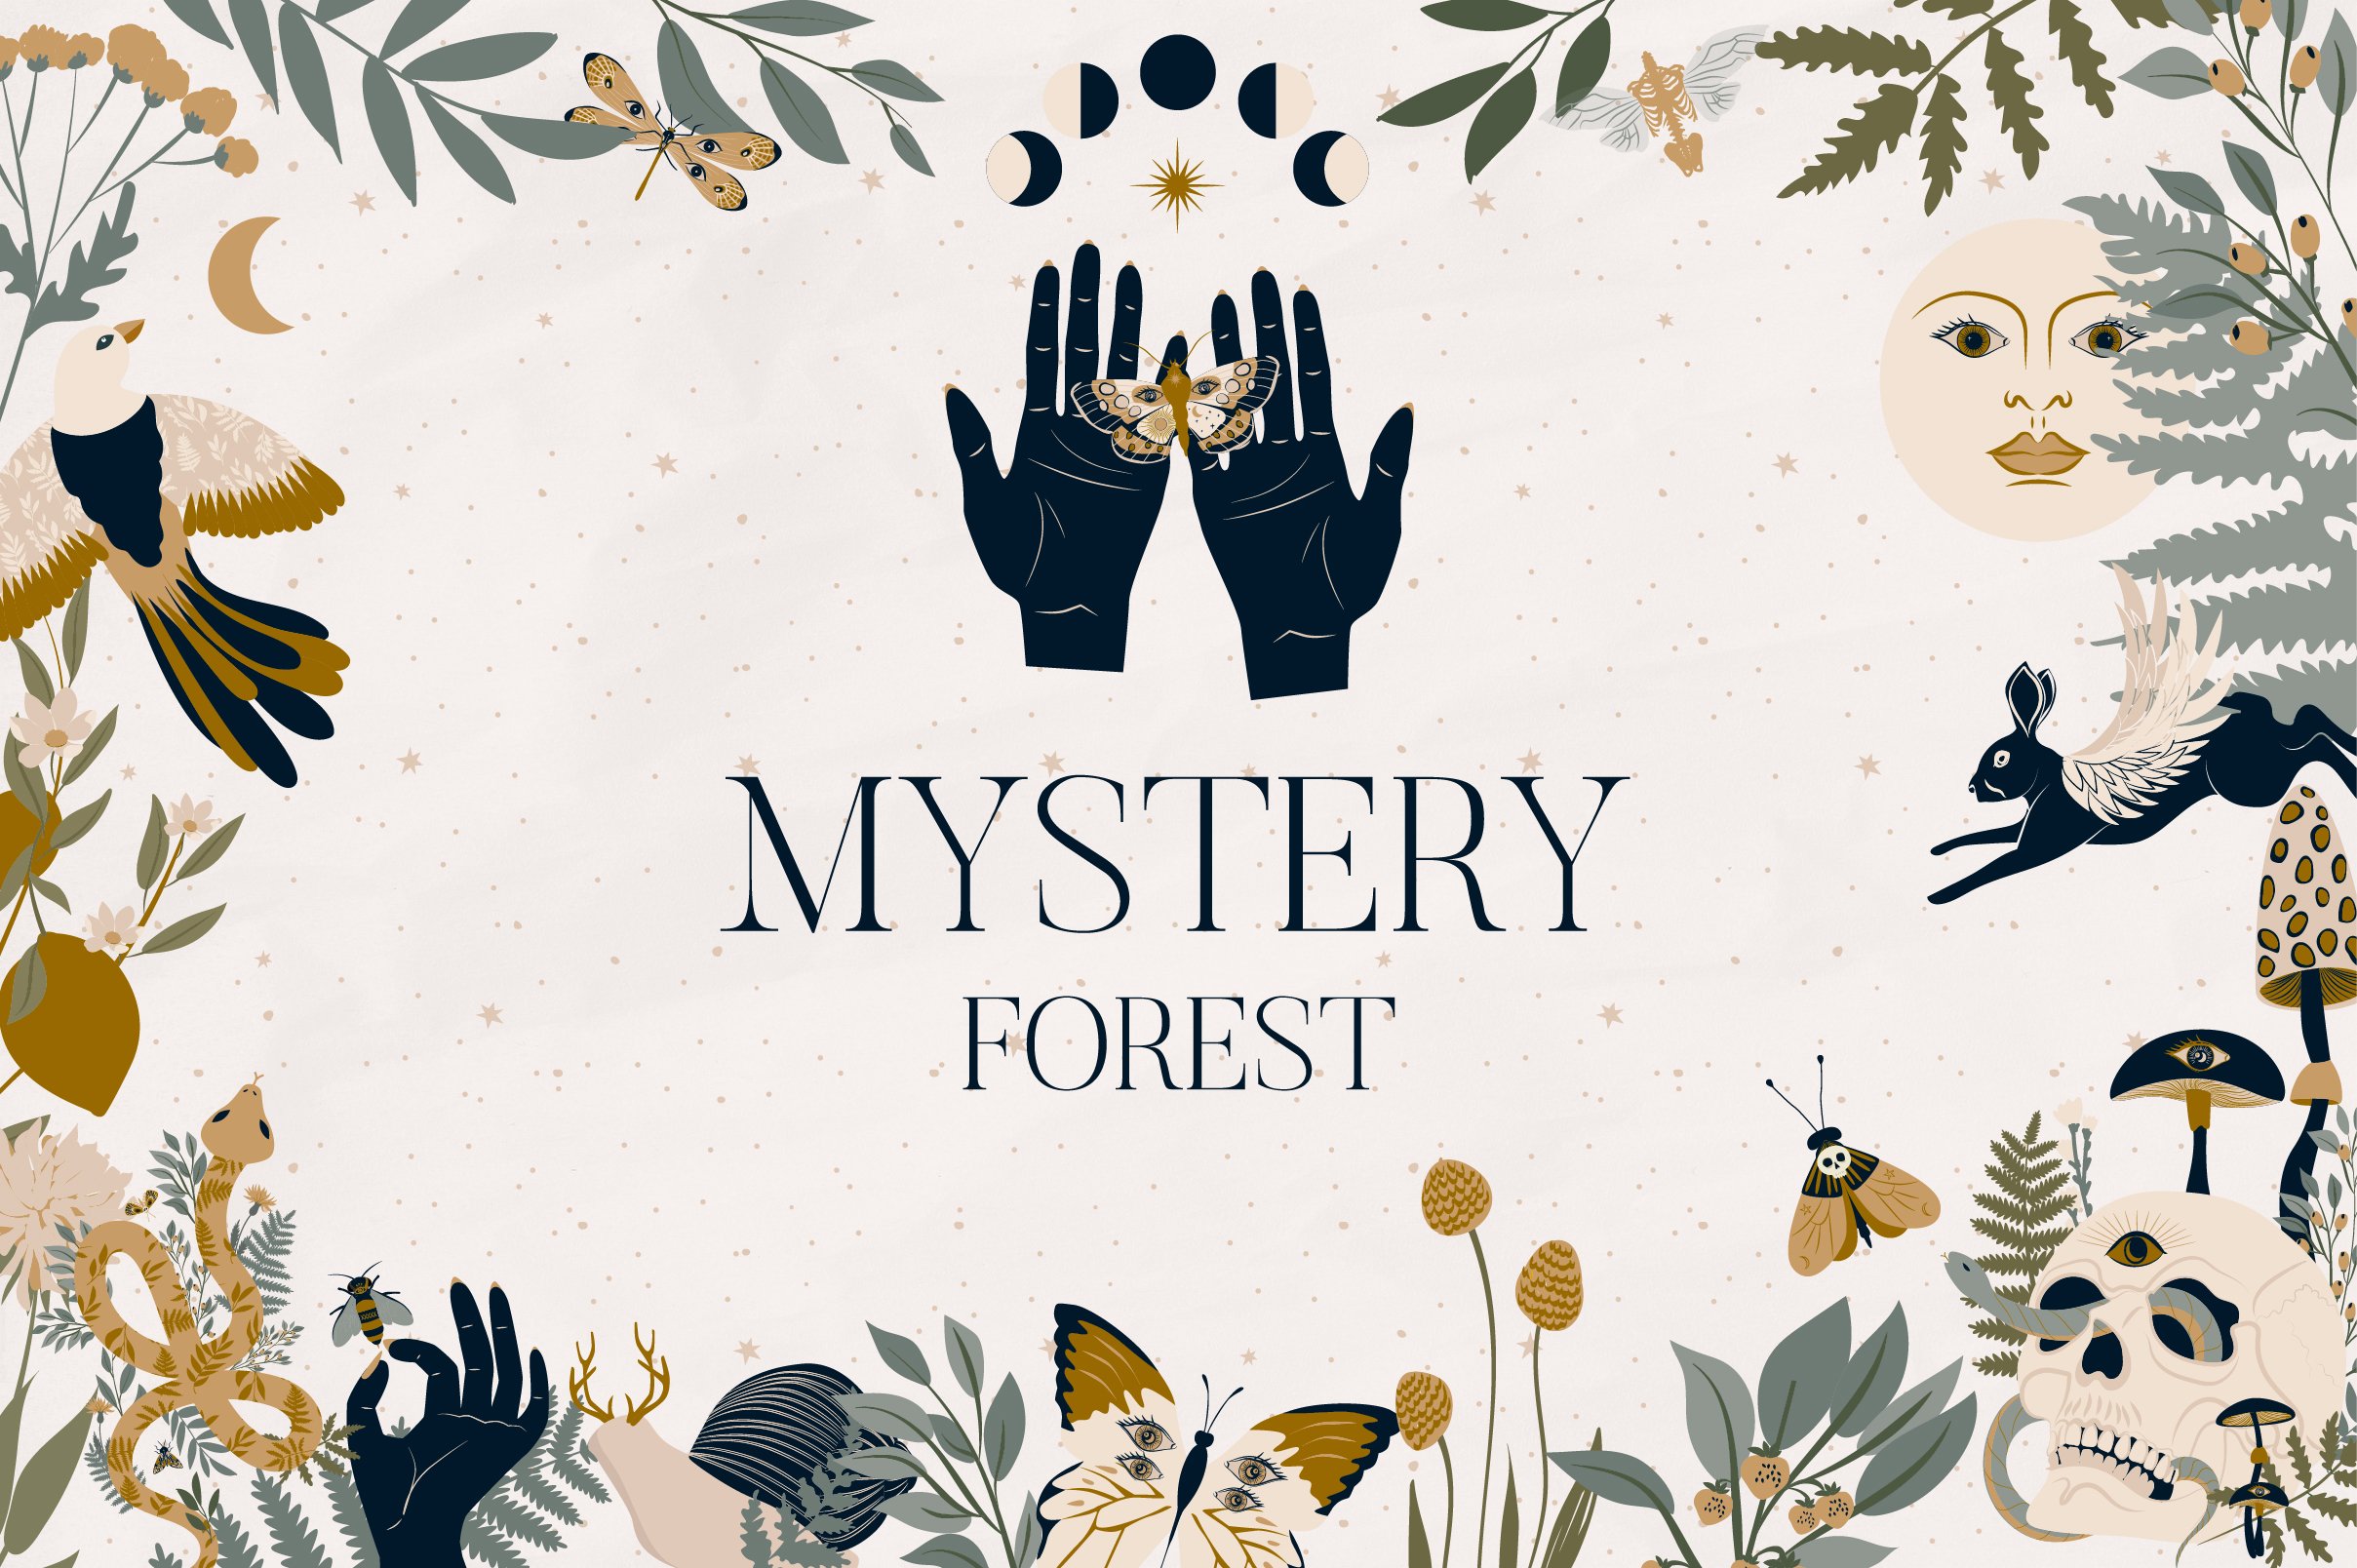 Mystery Forest cover image.